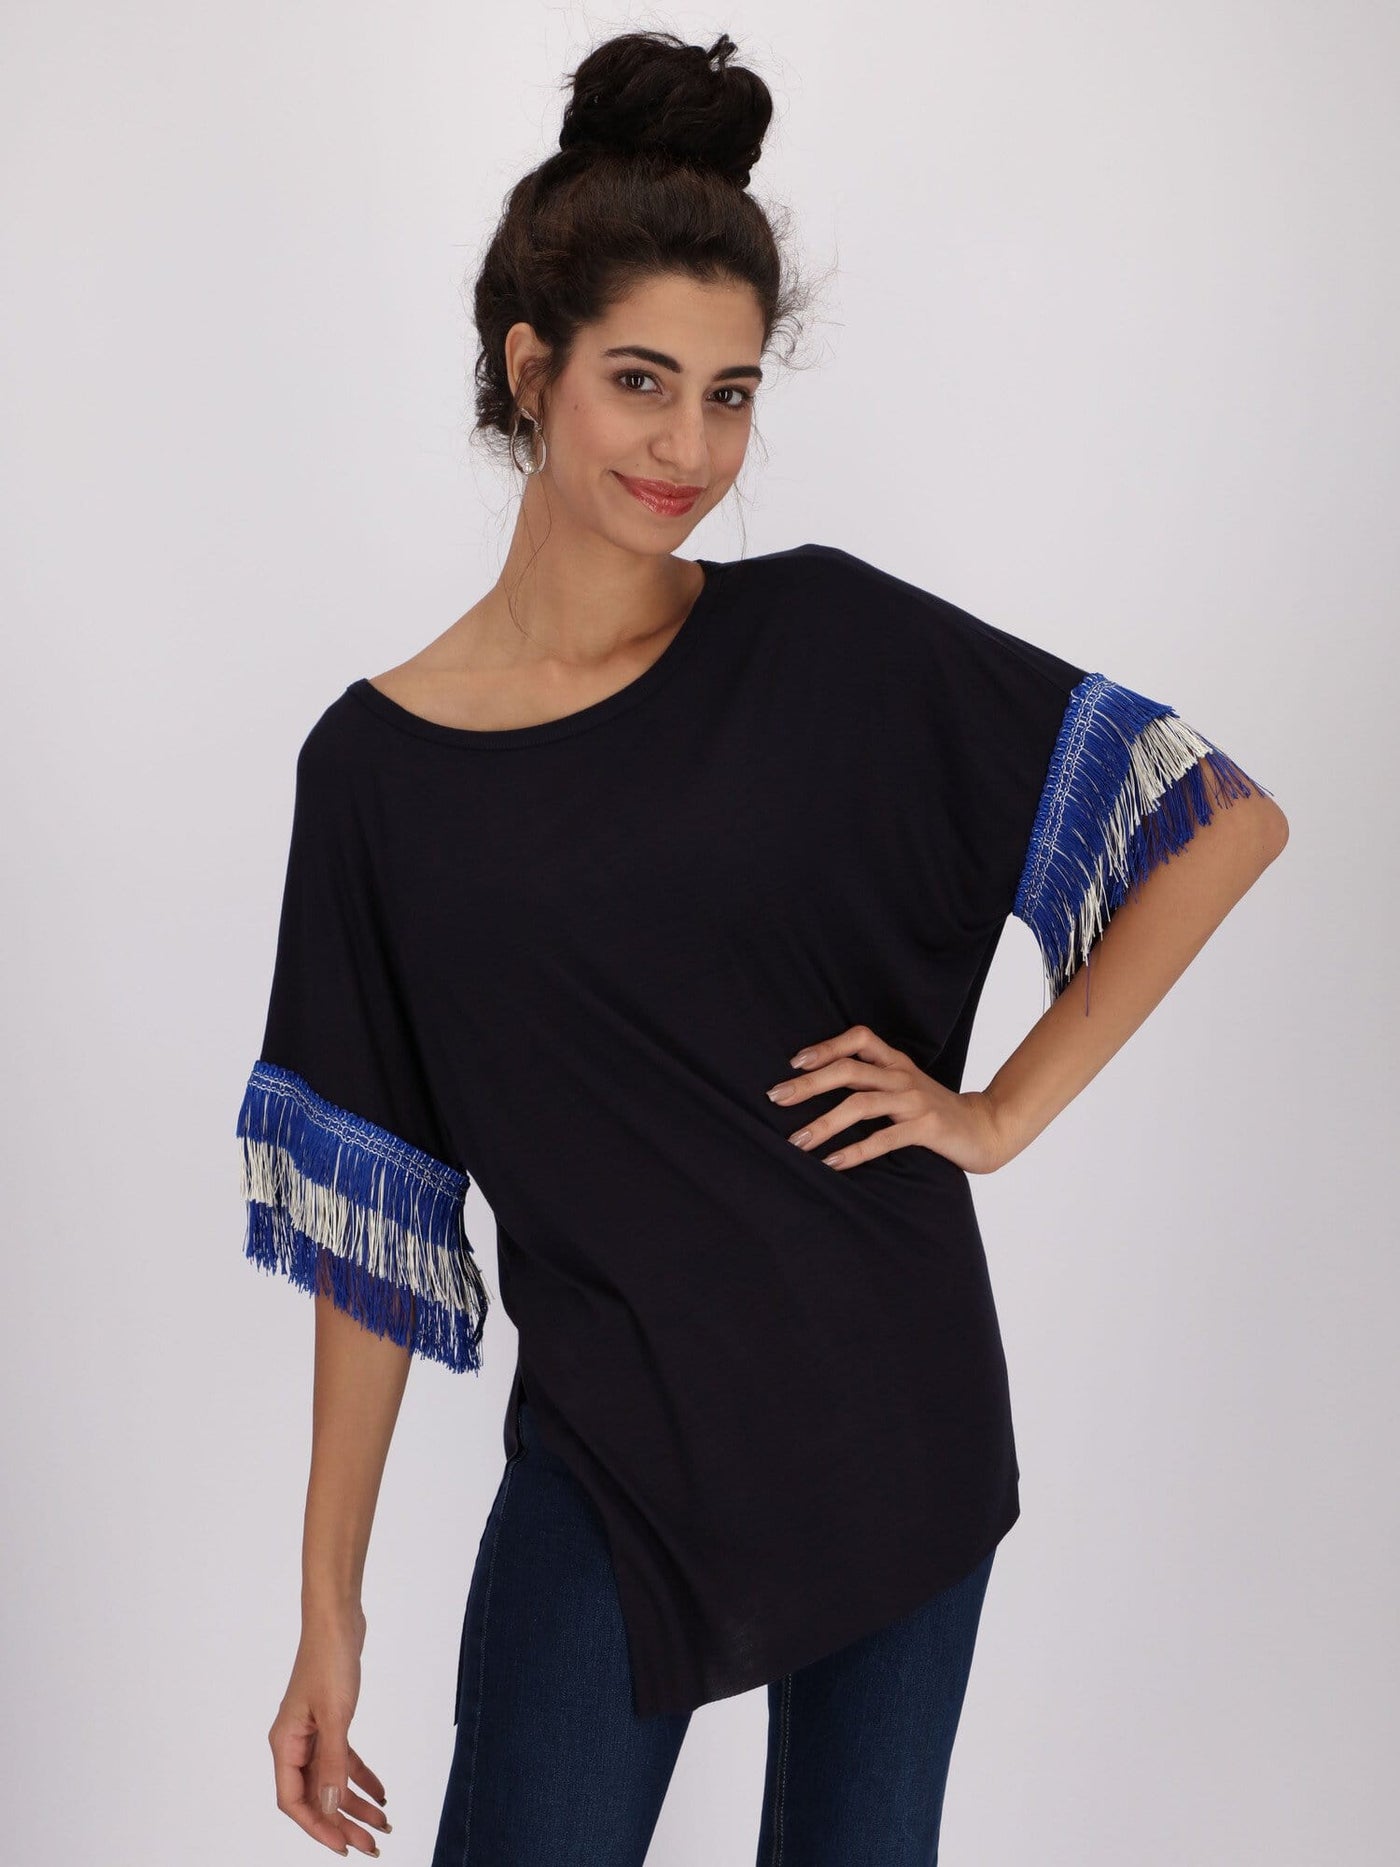 OR Tops & Blouses Front Knotted Top with Tassels Kimono Sleeve